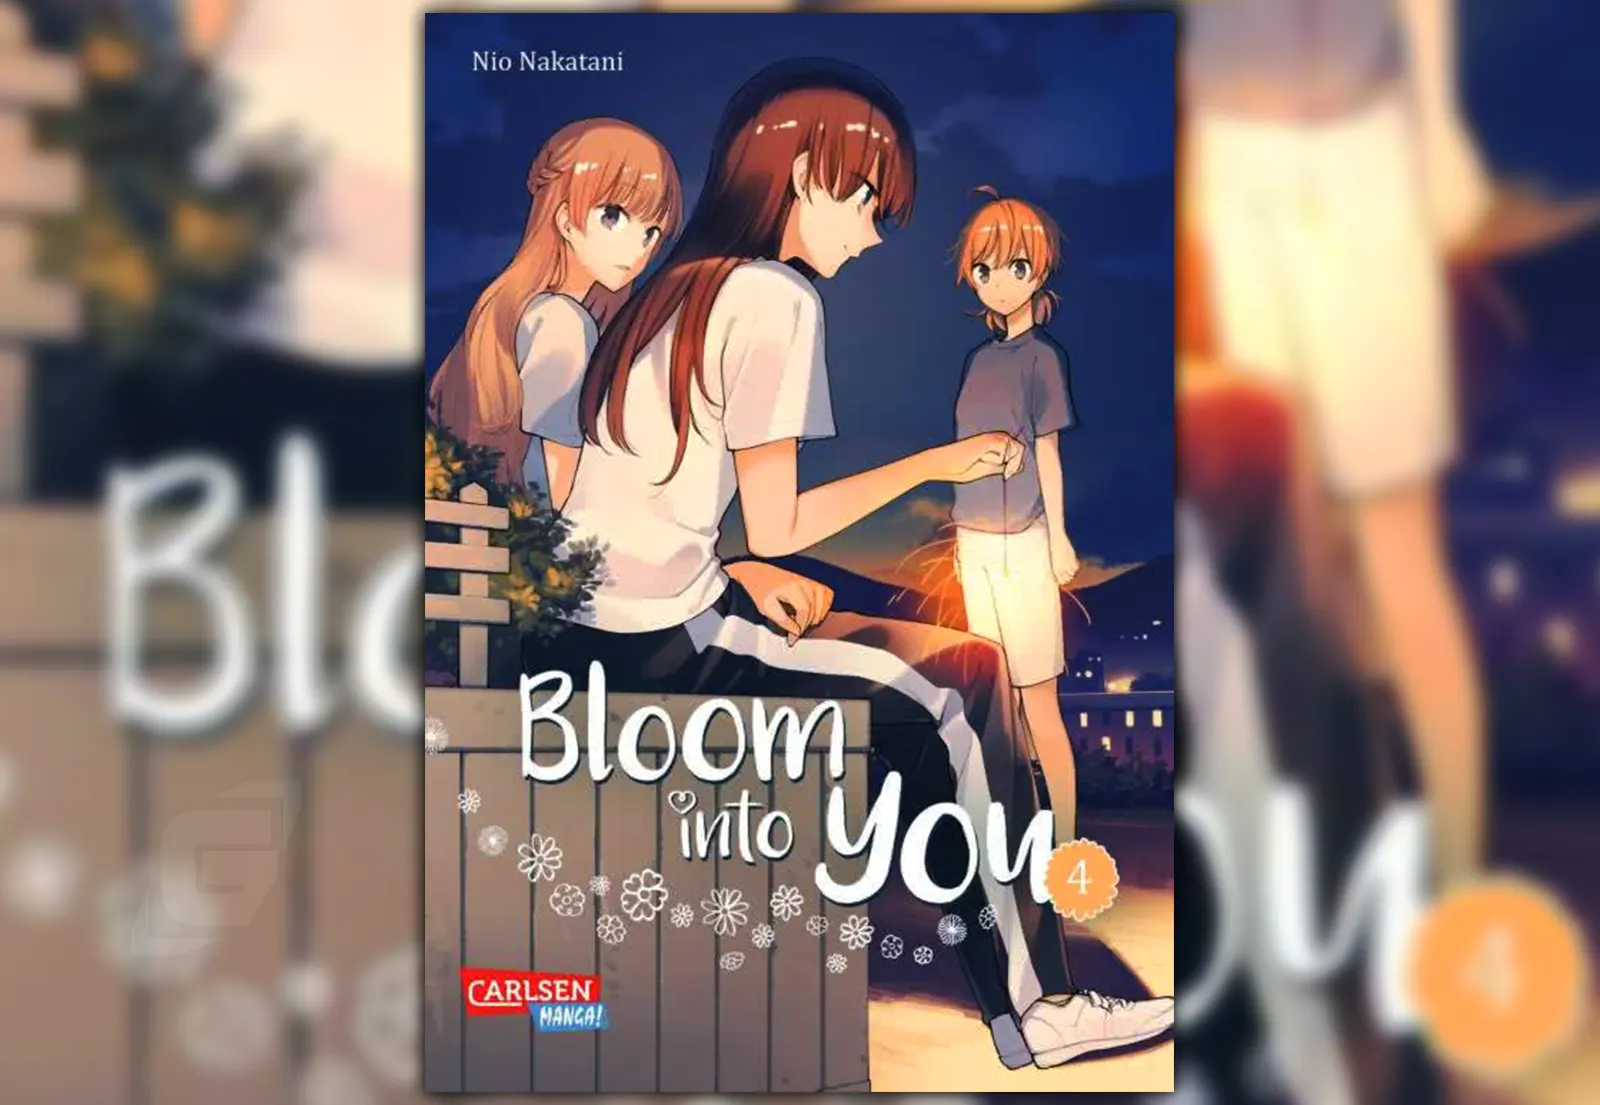 Review zu Band 4 von Bloom into you